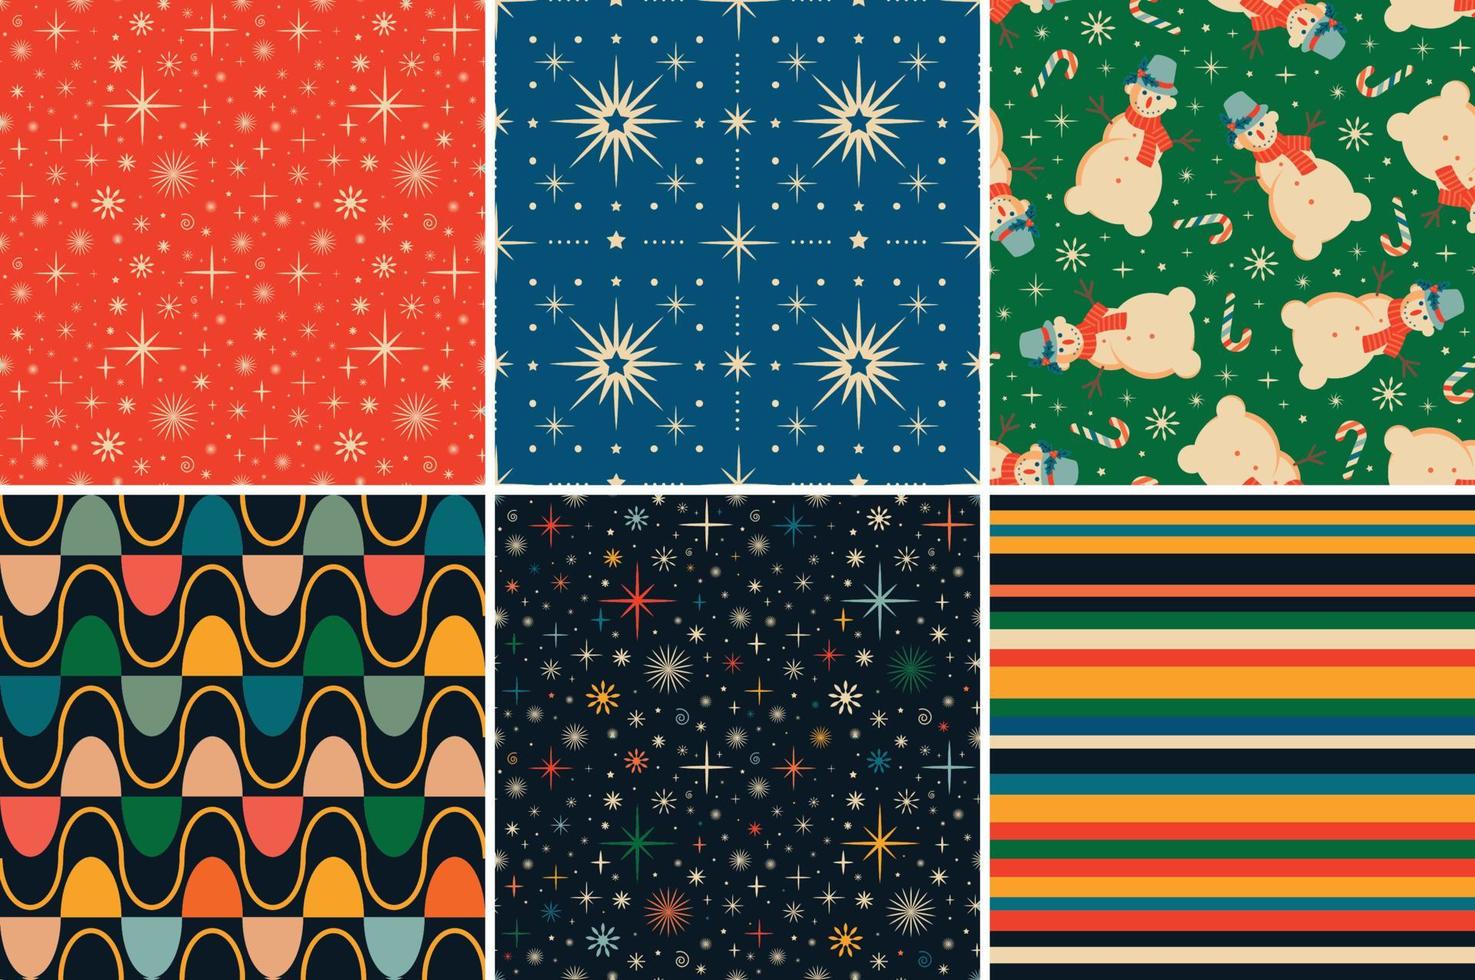 Vintage retro Christmas seamless patterns in the style of the 60s and 70s vector